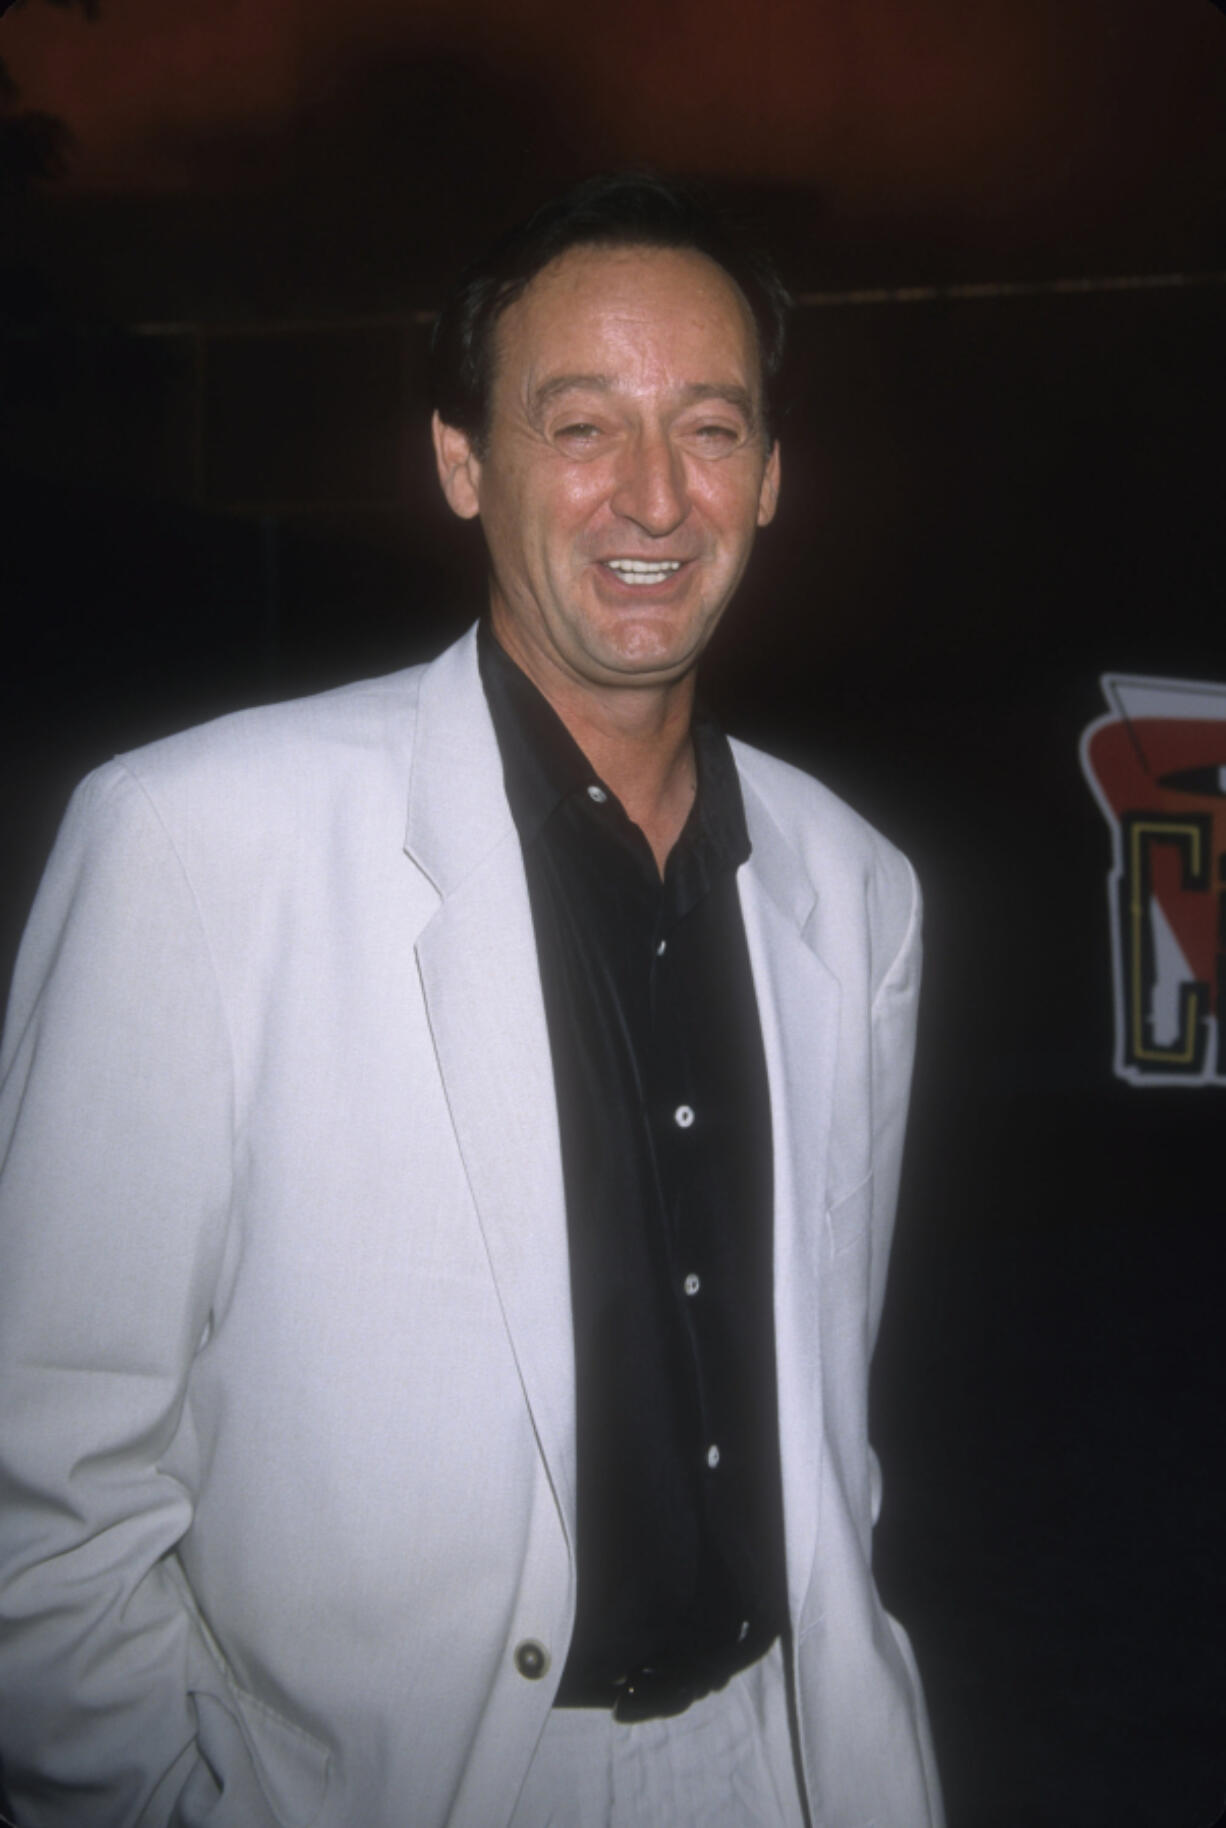 Joe Flaherty attends the NBC summer press tour in Universal City, Calif., on July 19, 2000.